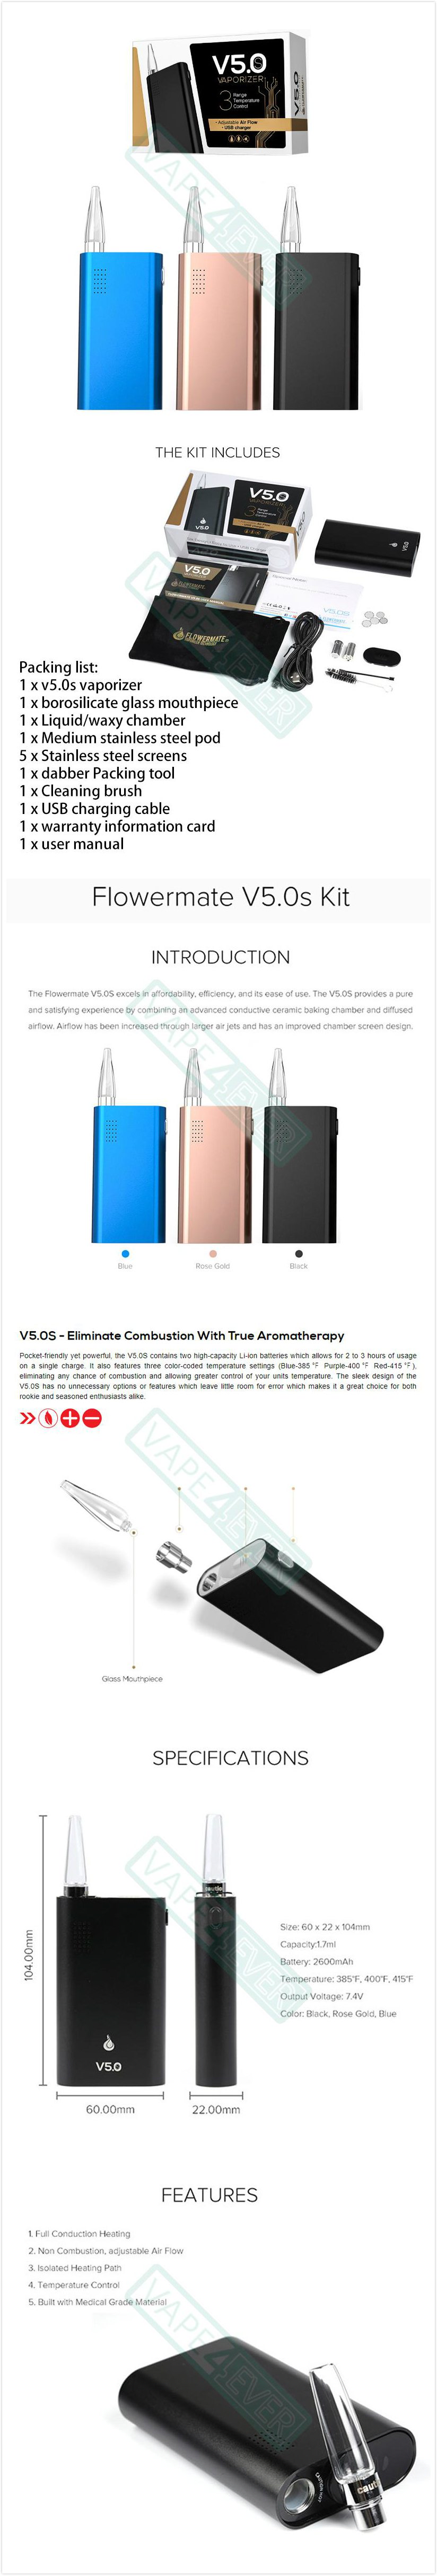 Flowermate V5.0s Vaporizer Kit With Li-ion Batteries & Dab Tool For Dry Herb Instruction